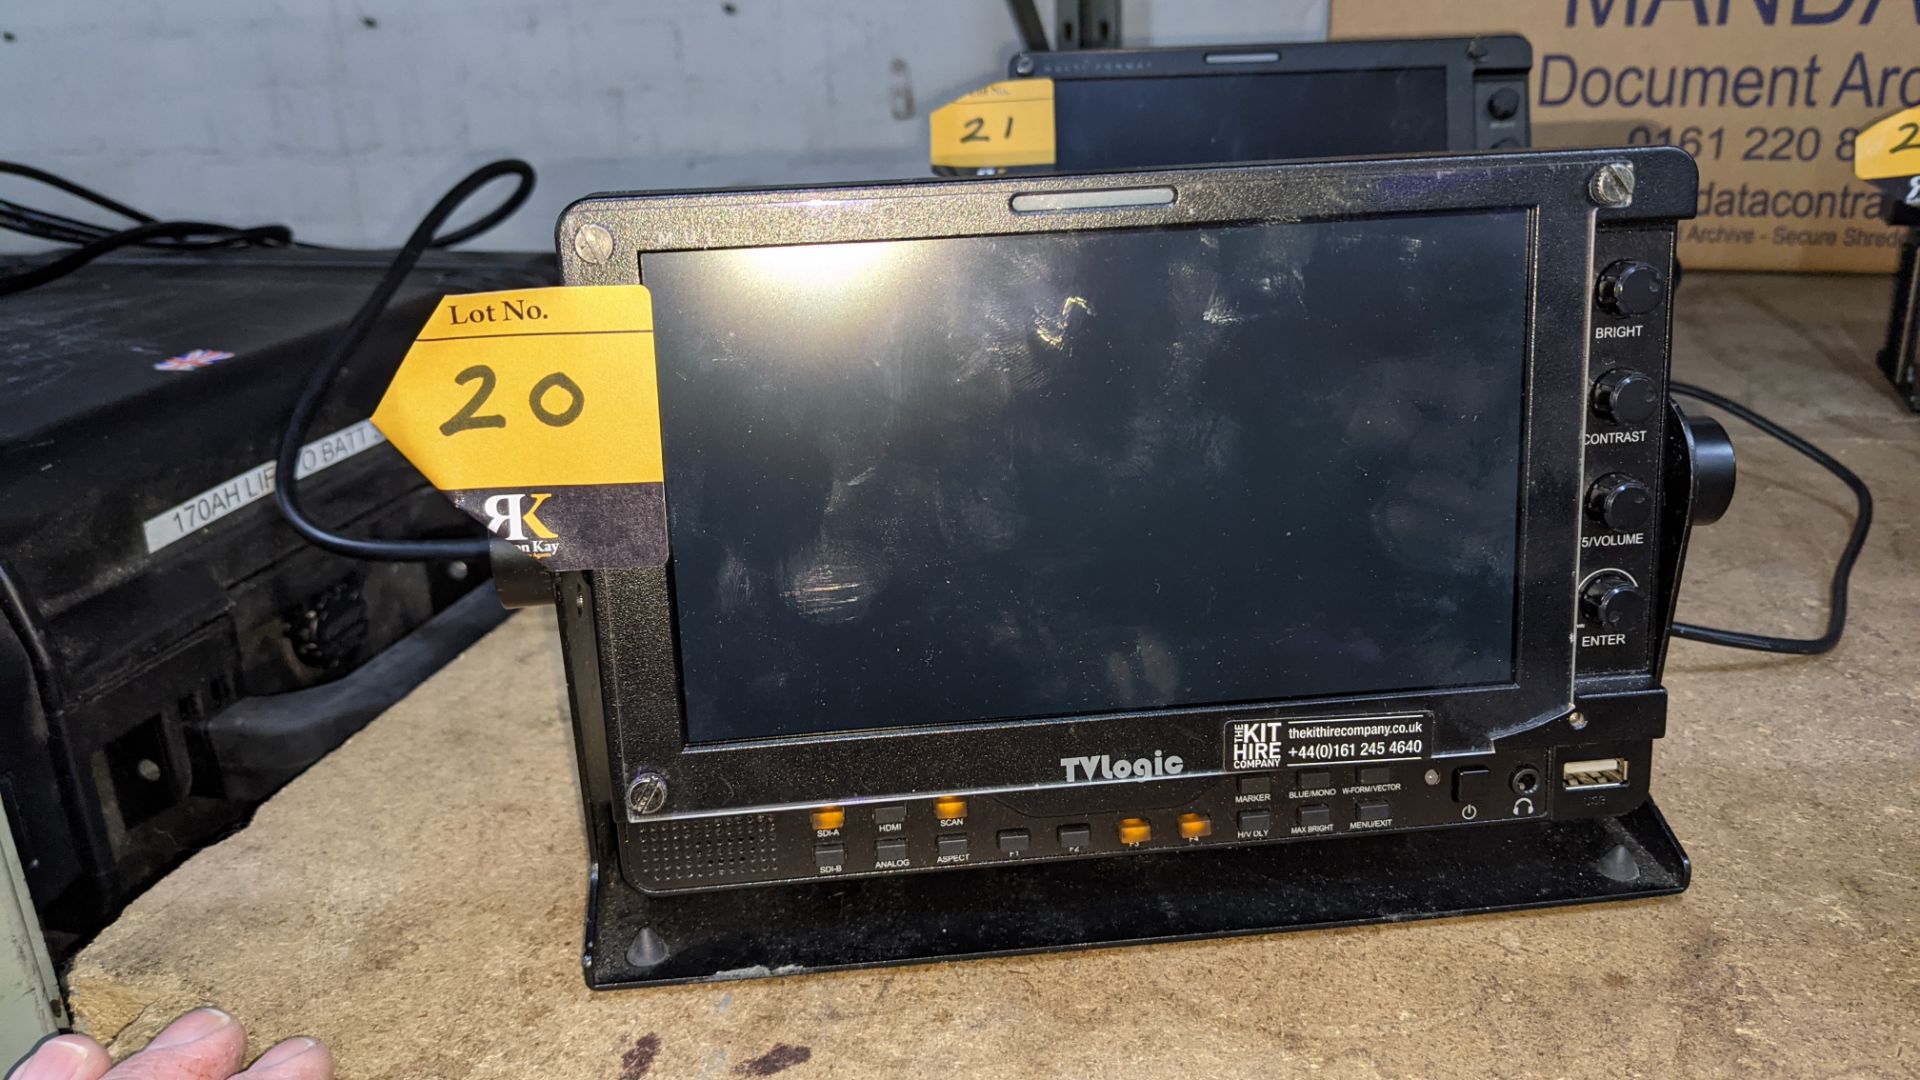 TVLogic multi format LCD monitor model LVM-075A, including hinged bracket & power supply - Image 2 of 12